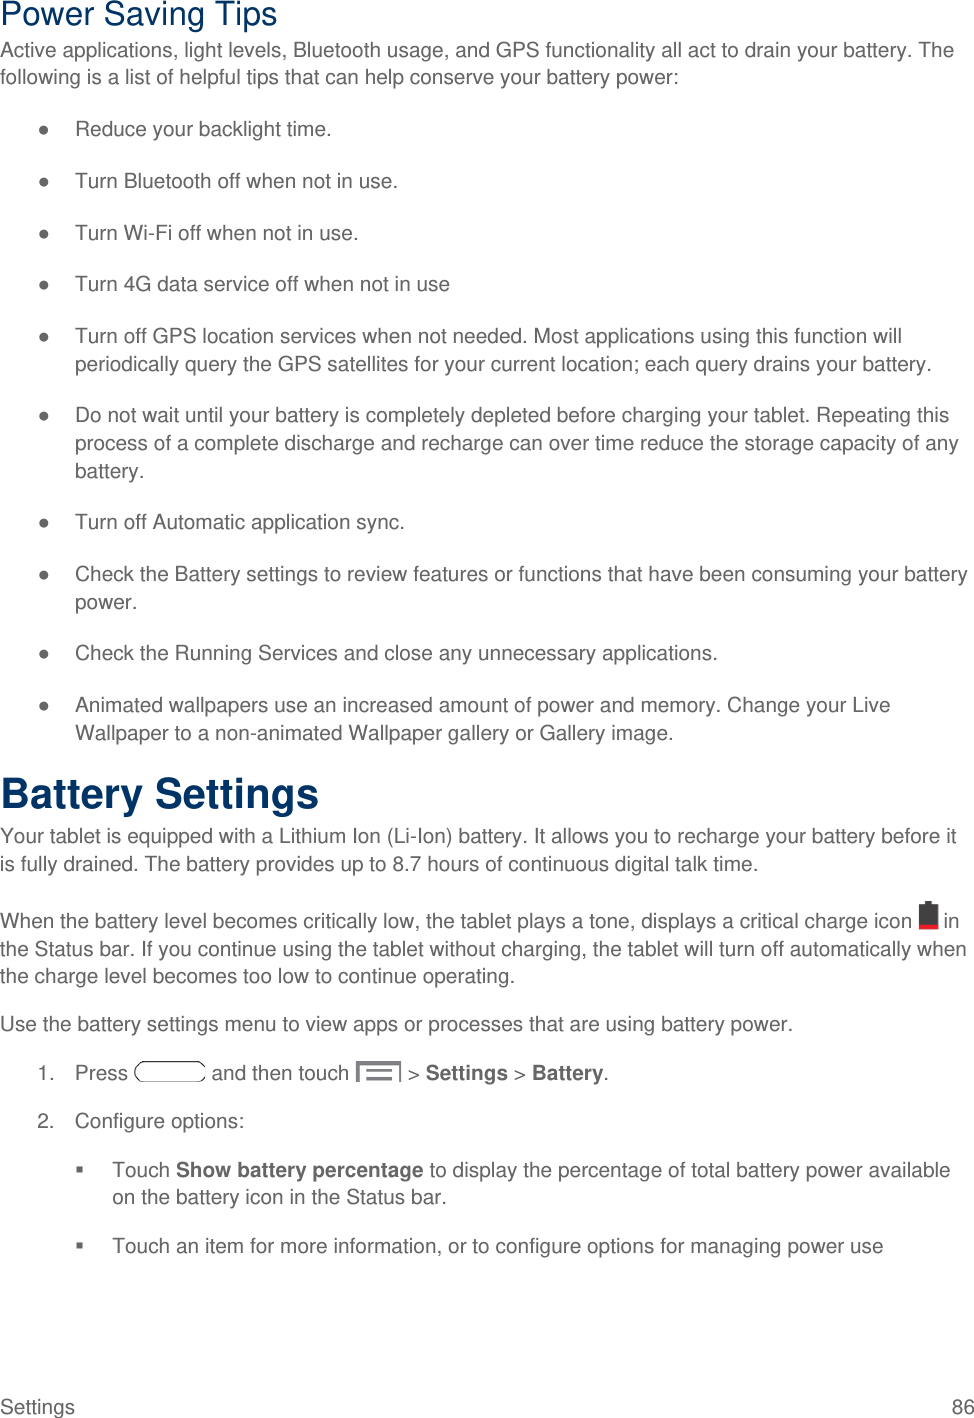  Power Saving Tips Active applications, light levels, Bluetooth usage, and GPS functionality all act to drain your battery. The following is a list of helpful tips that can help conserve your battery power: ● Reduce your backlight time.  ● Turn Bluetooth off when not in use. ● Turn Wi-Fi off when not in use.  ● Turn 4G data service off when not in use ● Turn off GPS location services when not needed. Most applications using this function will periodically query the GPS satellites for your current location; each query drains your battery. ● Do not wait until your battery is completely depleted before charging your tablet. Repeating this process of a complete discharge and recharge can over time reduce the storage capacity of any battery.  ● Turn off Automatic application sync. ● Check the Battery settings to review features or functions that have been consuming your battery power.  ● Check the Running Services and close any unnecessary applications. ● Animated wallpapers use an increased amount of power and memory. Change your Live Wallpaper to a non-animated Wallpaper gallery or Gallery image.  Battery Settings Your tablet is equipped with a Lithium Ion (Li-Ion) battery. It allows you to recharge your battery before it is fully drained. The battery provides up to 8.7 hours of continuous digital talk time. When the battery level becomes critically low, the tablet plays a tone, displays a critical charge icon   in the Status bar. If you continue using the tablet without charging, the tablet will turn off automatically when the charge level becomes too low to continue operating. Use the battery settings menu to view apps or processes that are using battery power. 1. Press   and then touch   &gt; Settings &gt; Battery. 2. Configure options:  Touch Show battery percentage to display the percentage of total battery power available on the battery icon in the Status bar.  Touch an item for more information, or to configure options for managing power use Settings 86 